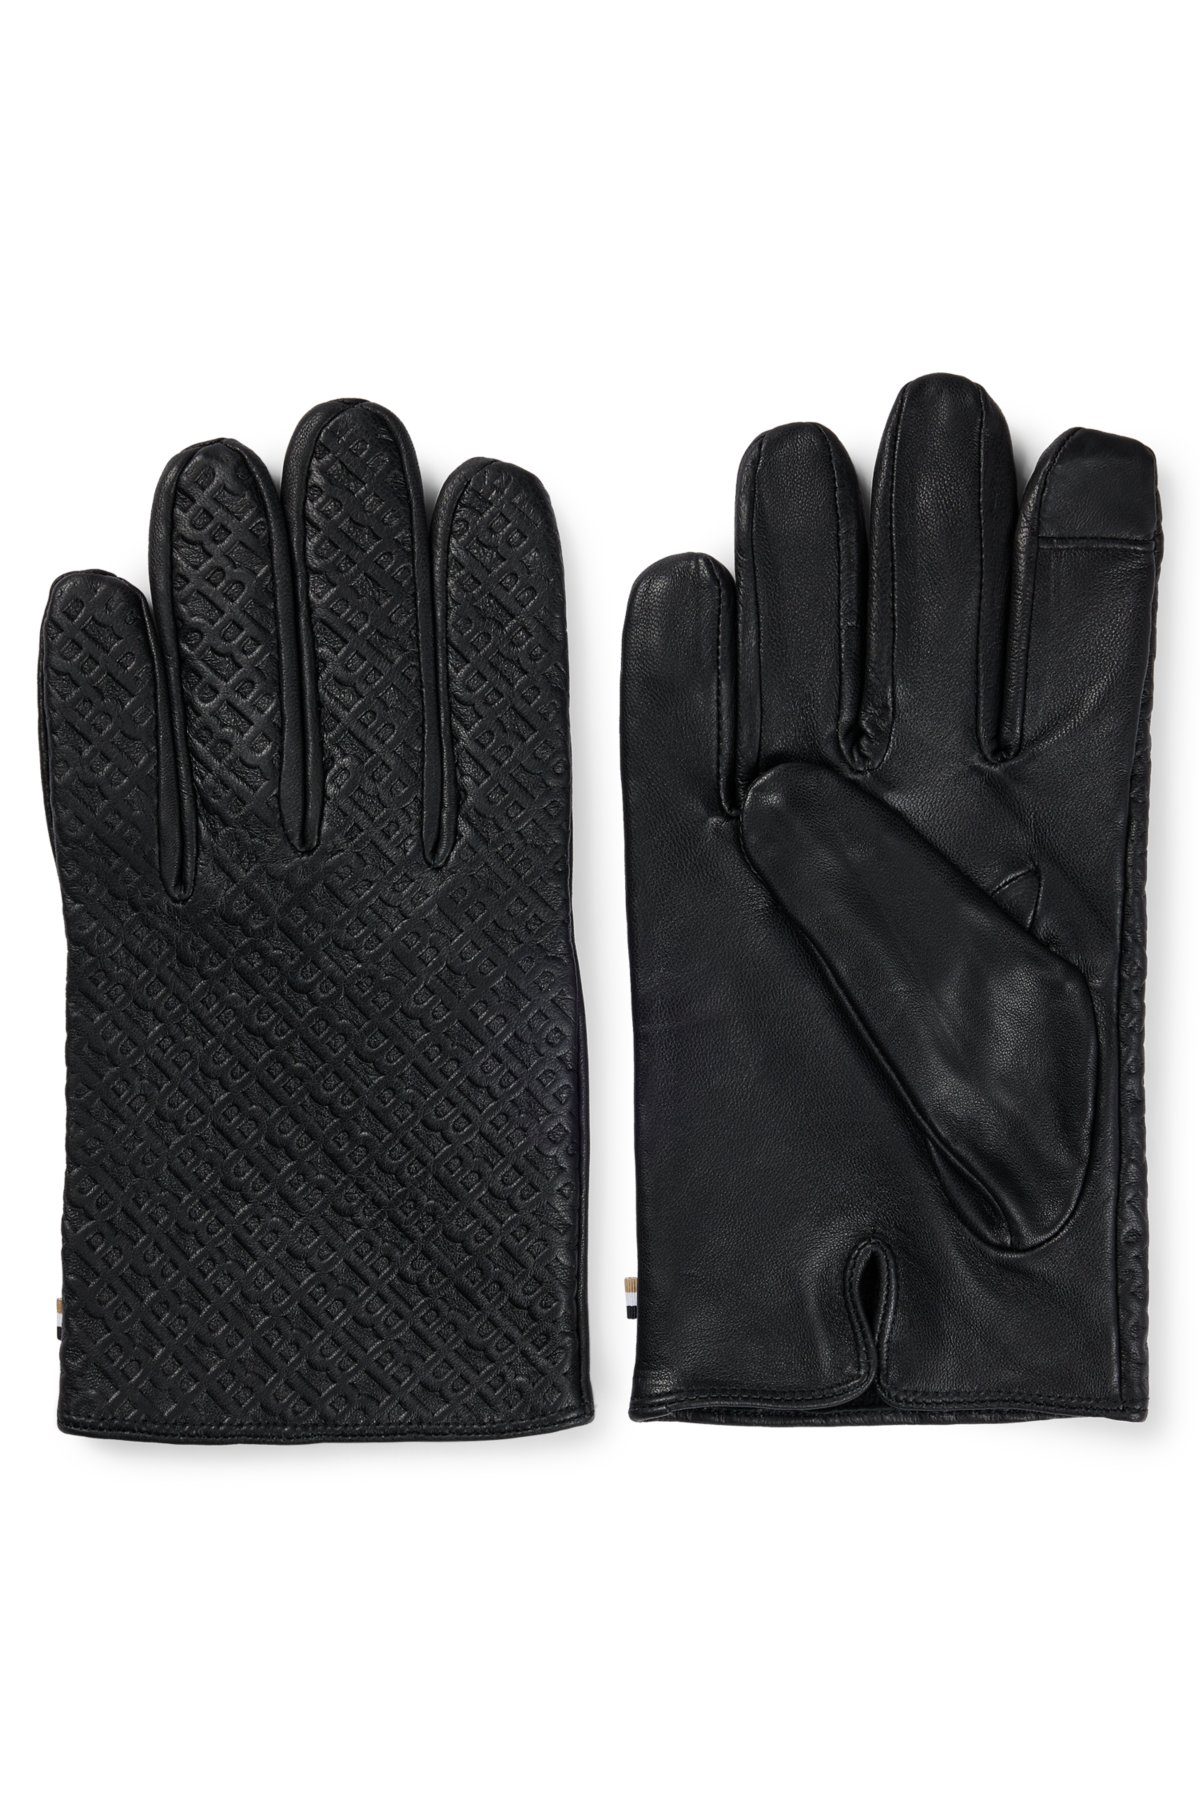 BOSS - Monogrammed gloves fingertips leather in with touchscreen-friendly